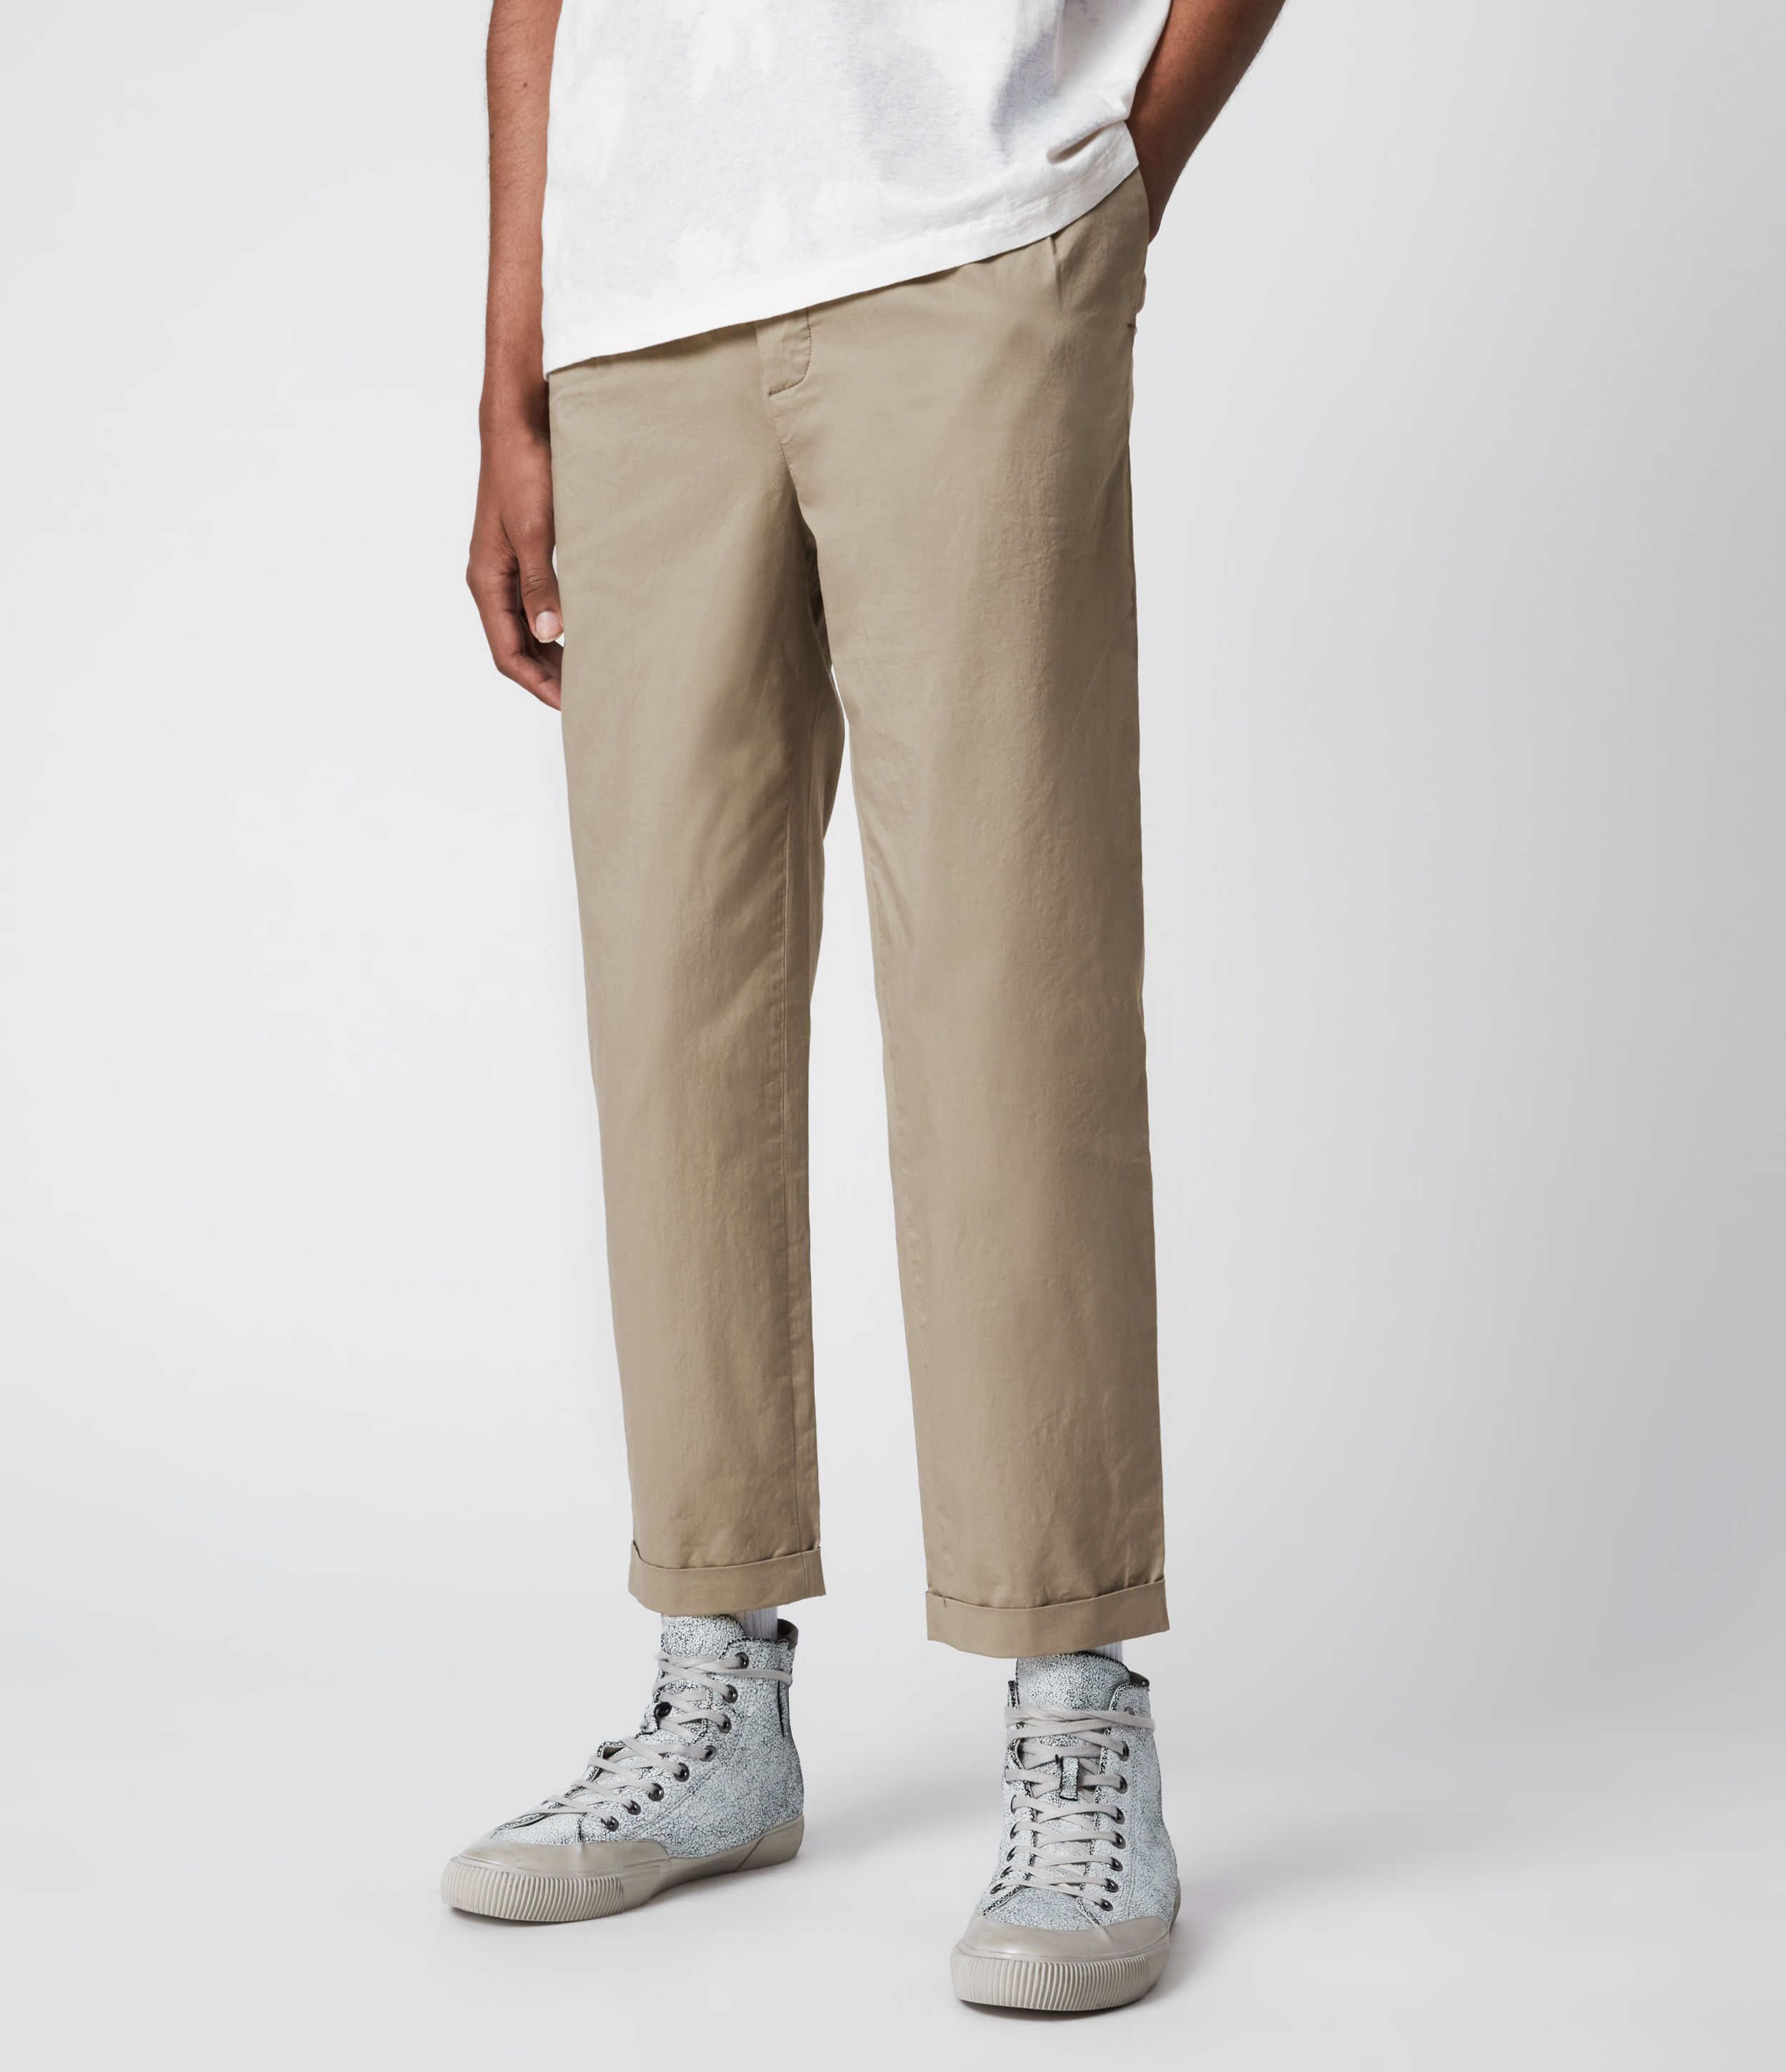 50% OFF APPLIED
 
Matford Cropped Straight Trousers


£59.00
Was £119.00 | AllSaints UK